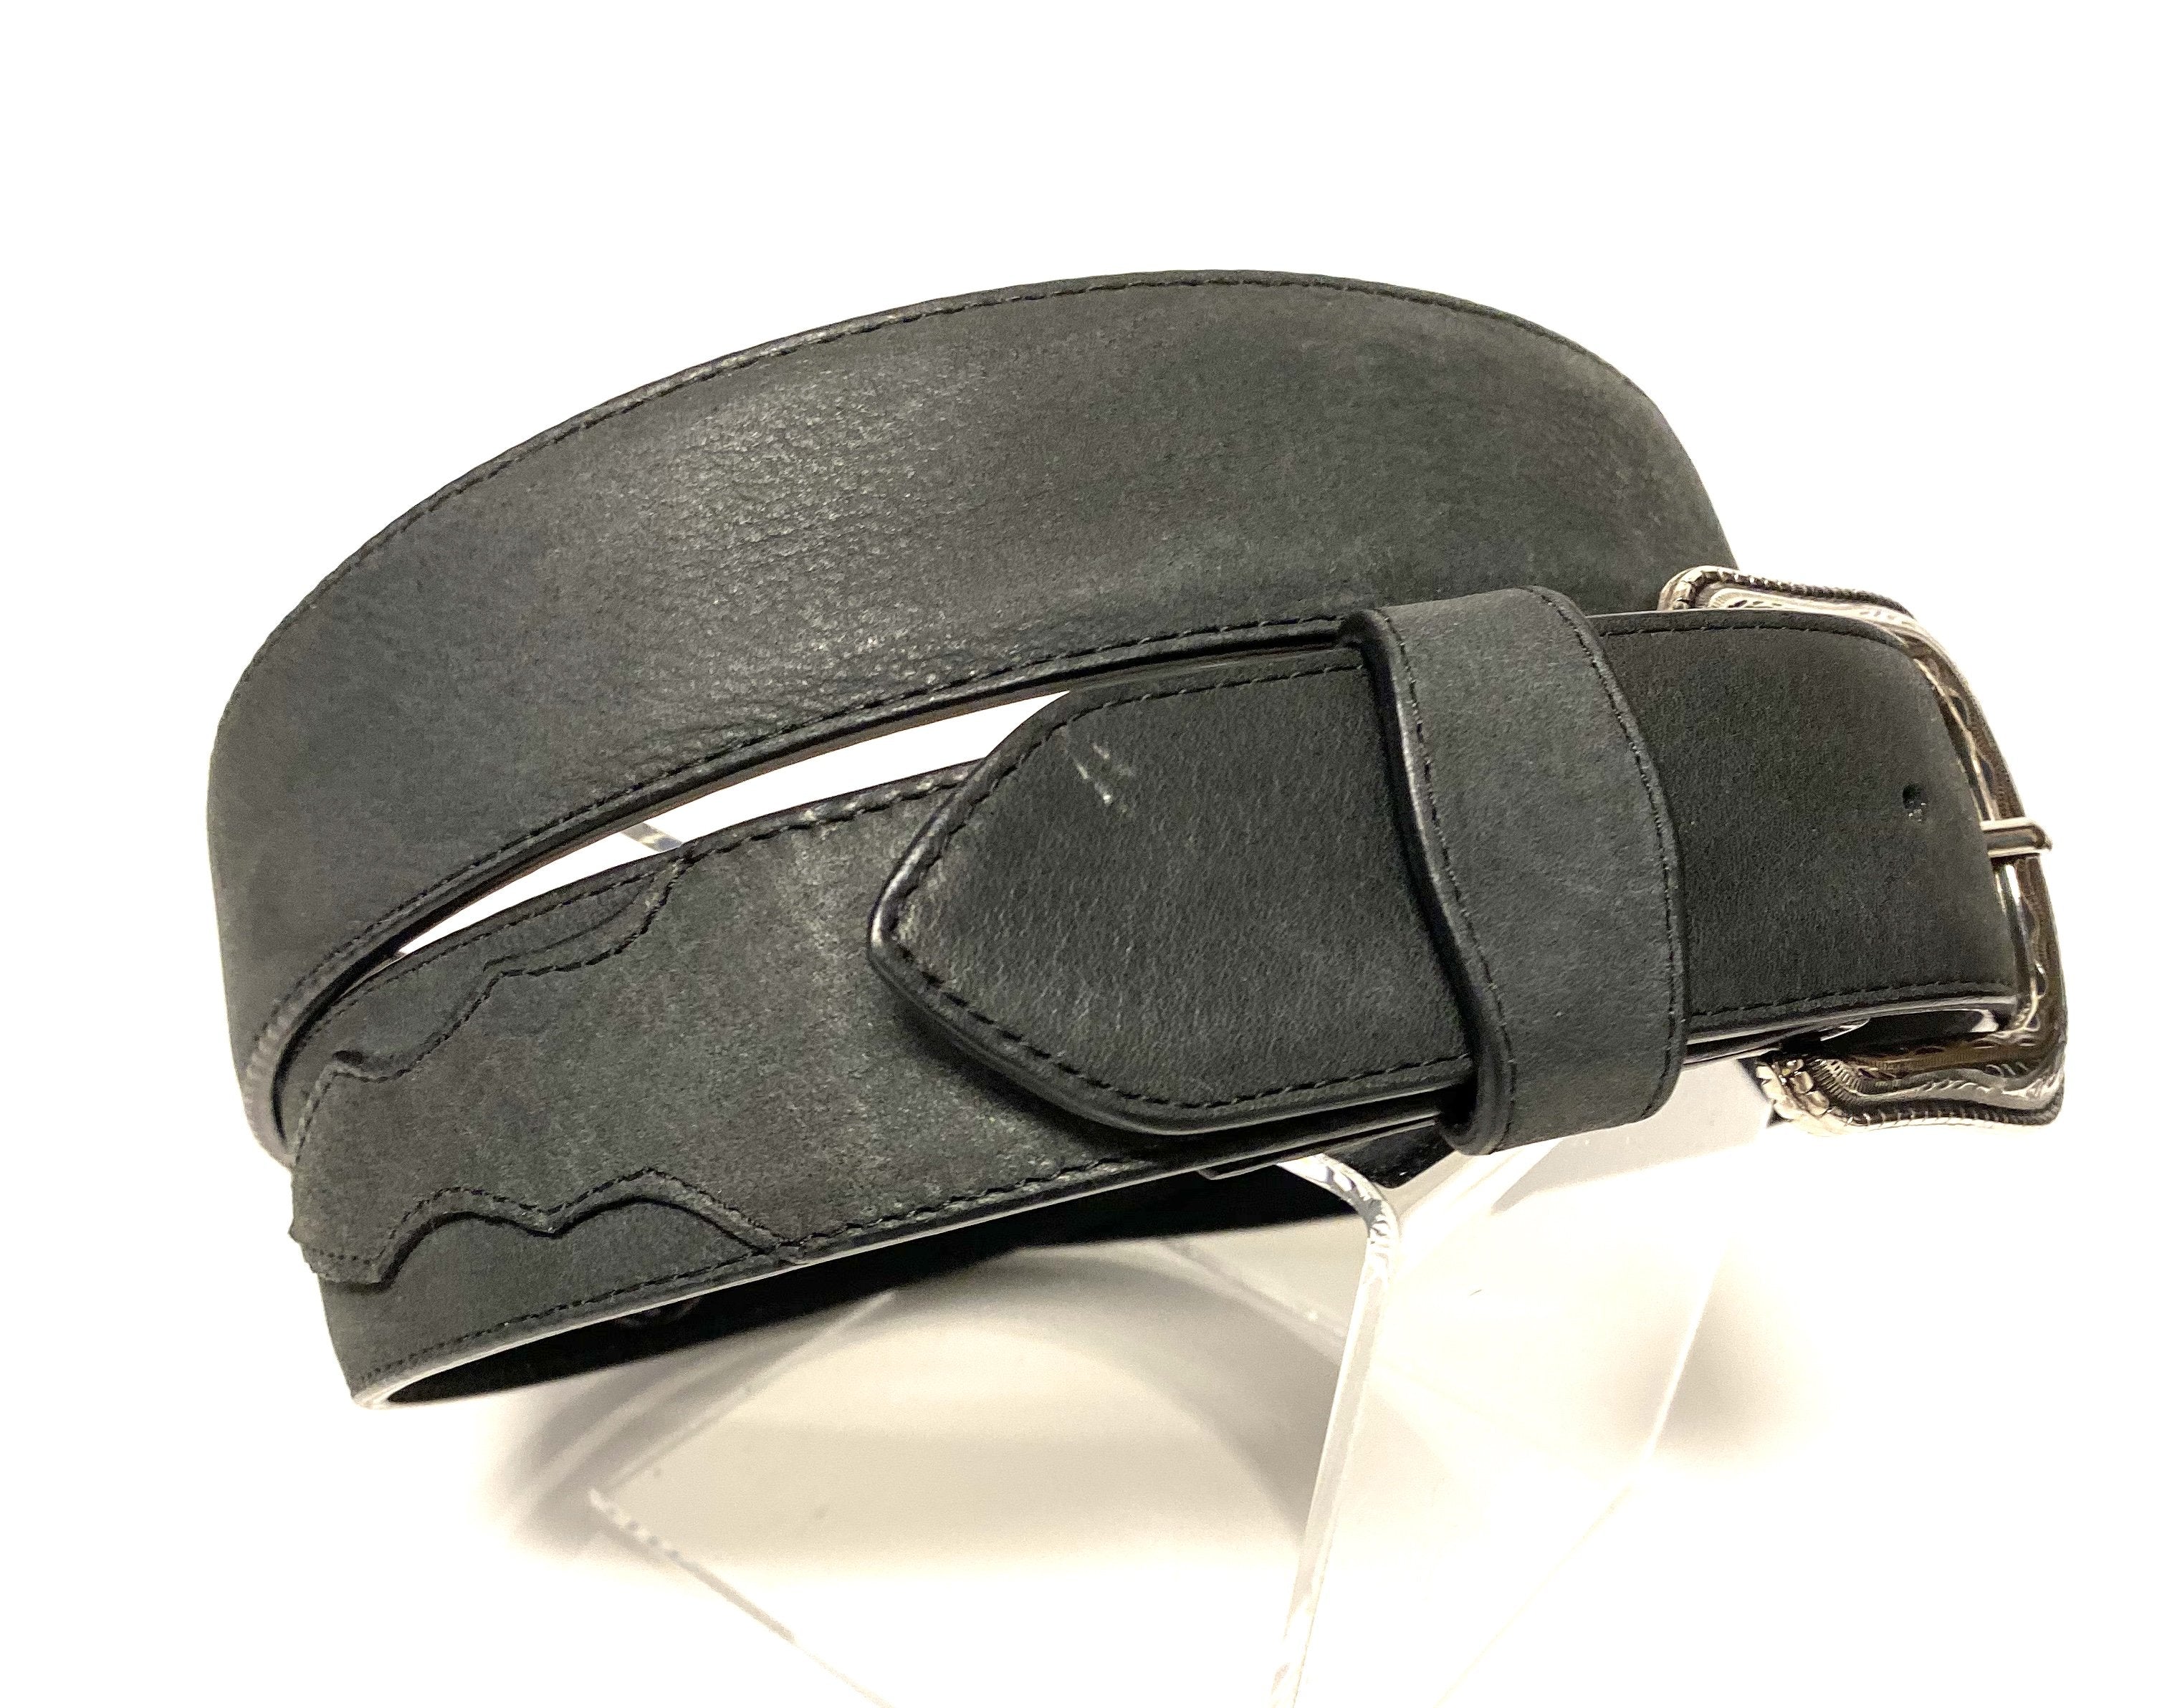 Off Tuc Leather Belt H40 in black